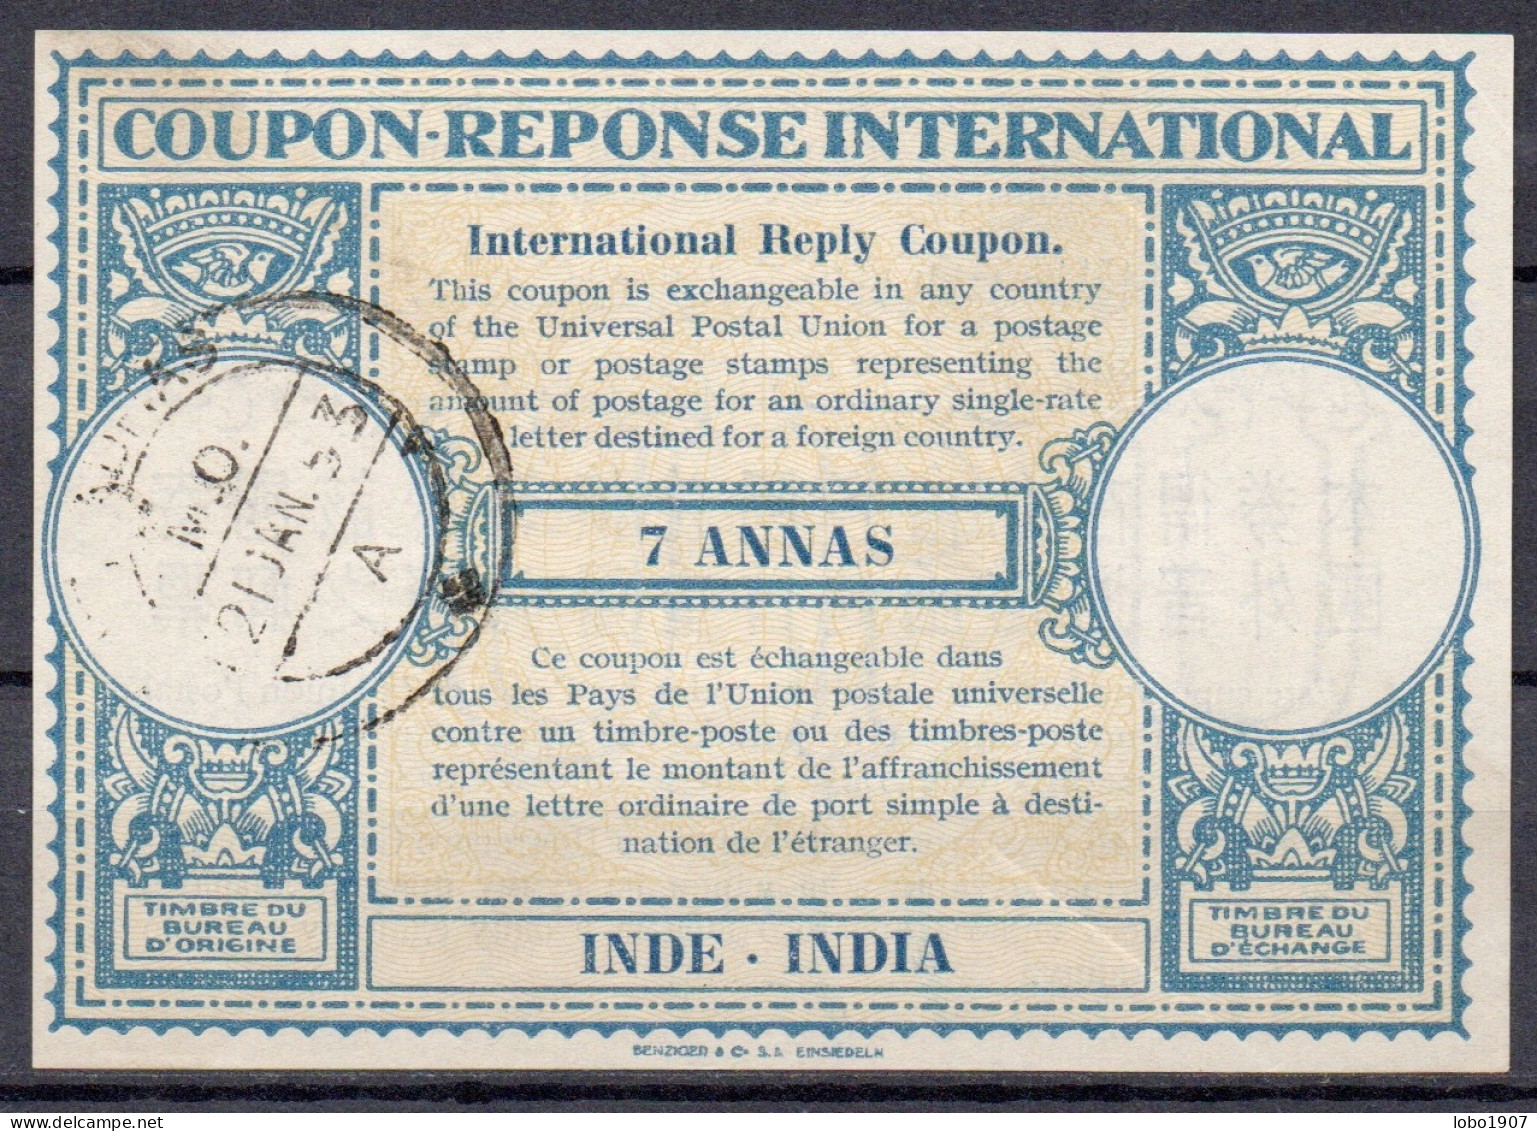 INDES INDIA 1953,  Lo15  7 ANNAS  International Reply Coupon Reponse Antwortschein IRC IAS  O MADRAS 21.01.53 - Zonder Classificatie